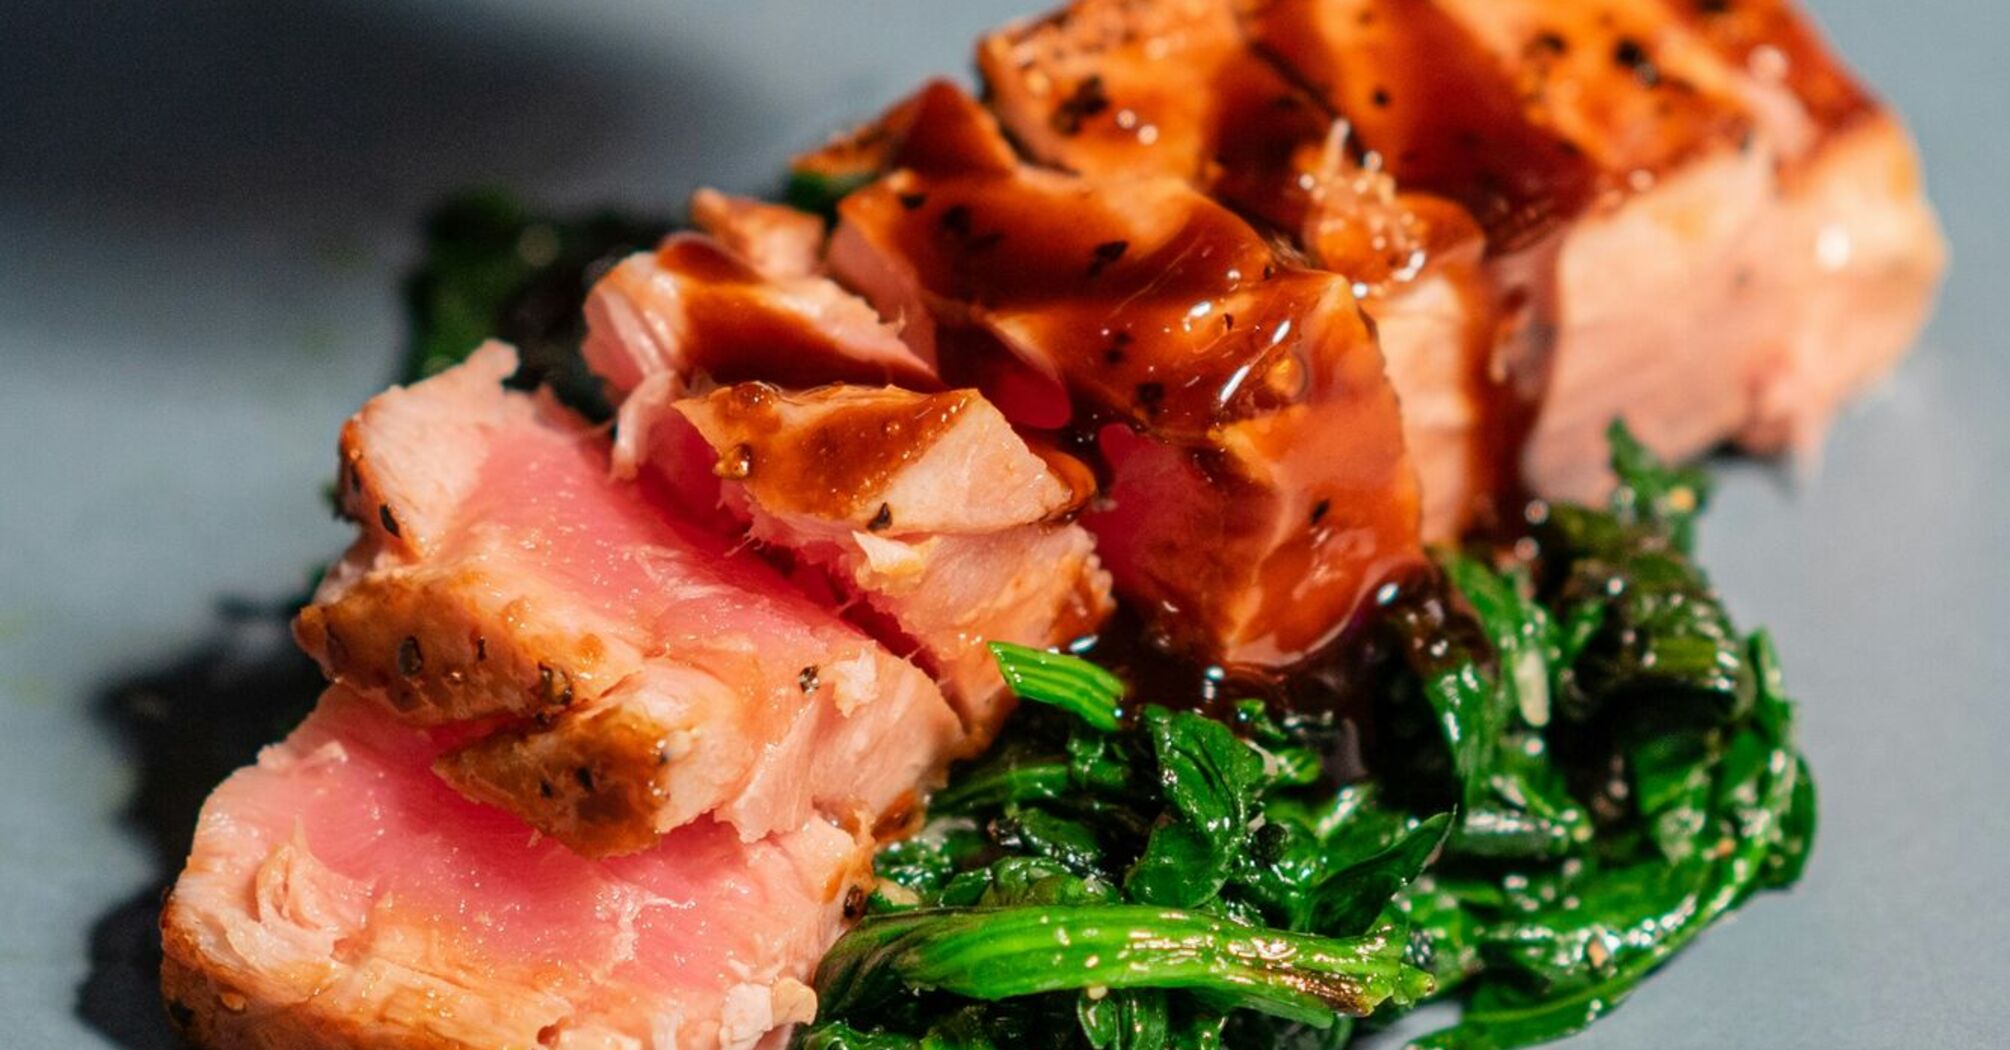 Sliced pink seared tuna on a blue plate with greens